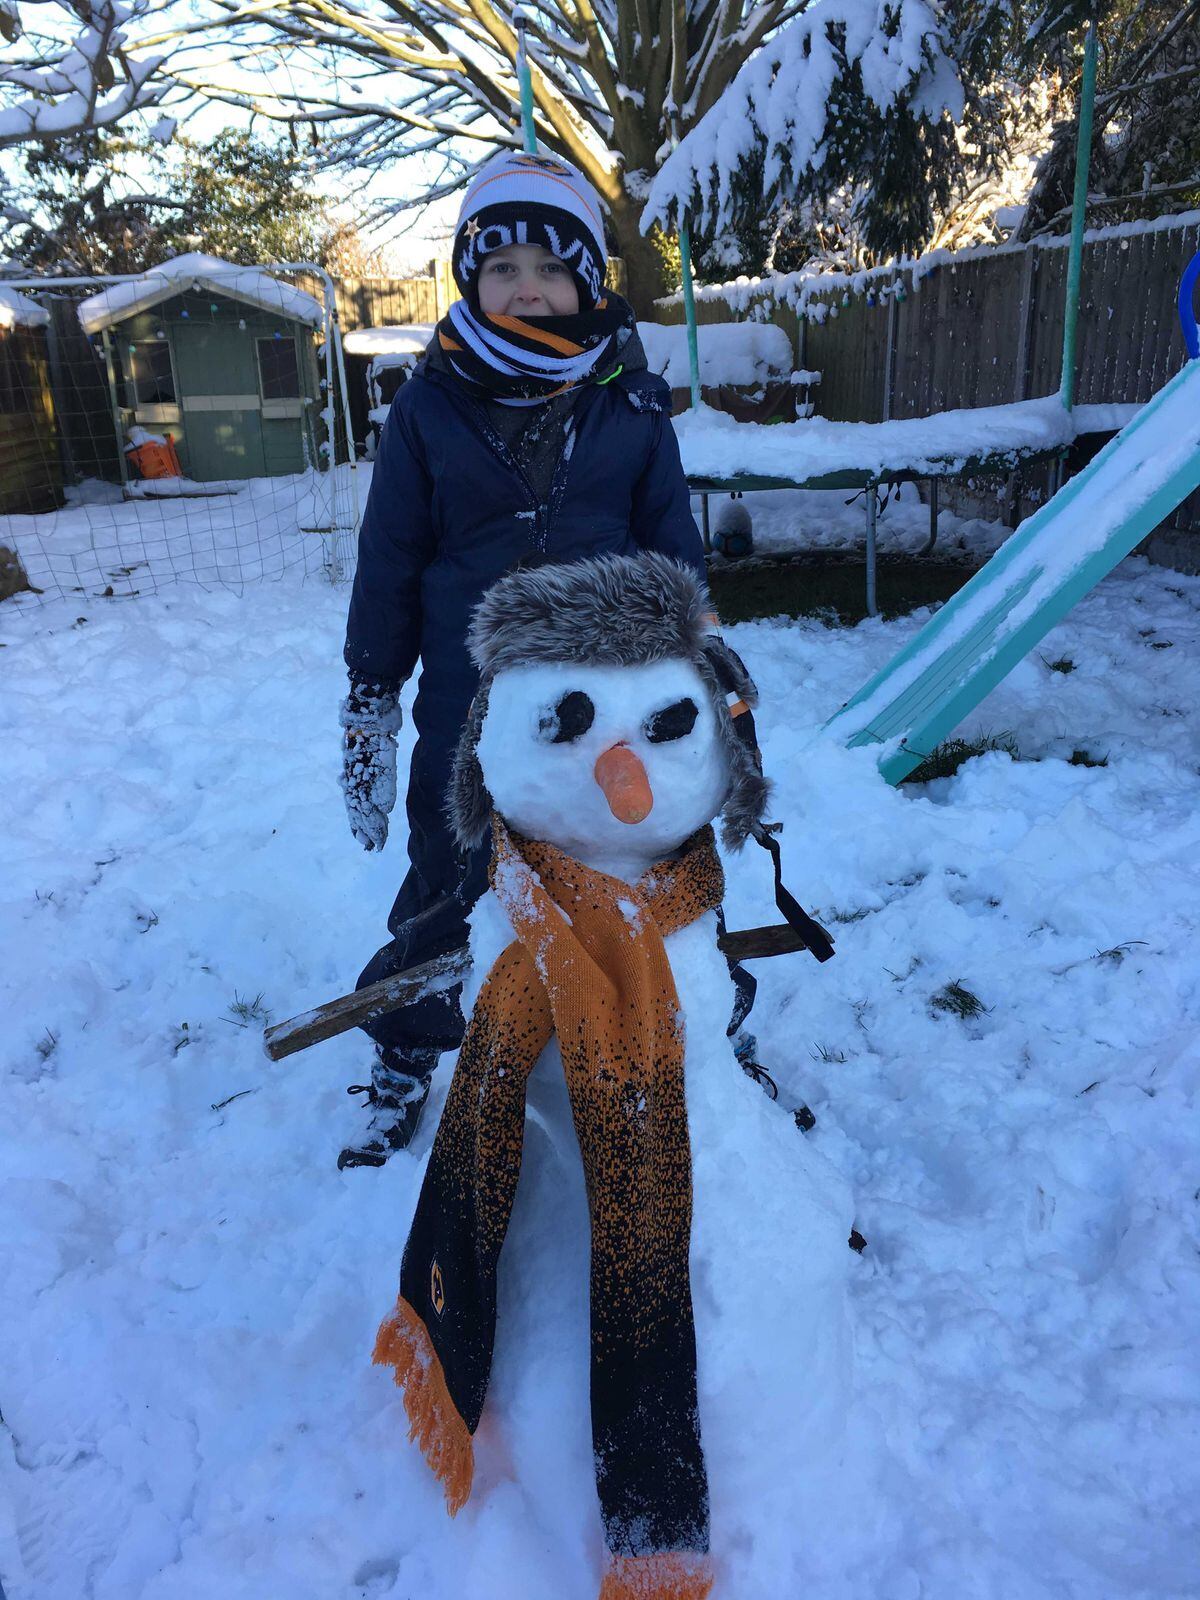 Jennifer Ebblewhite sent in this picture of her son, season ticket holder, Billy, with his Wolves snowman